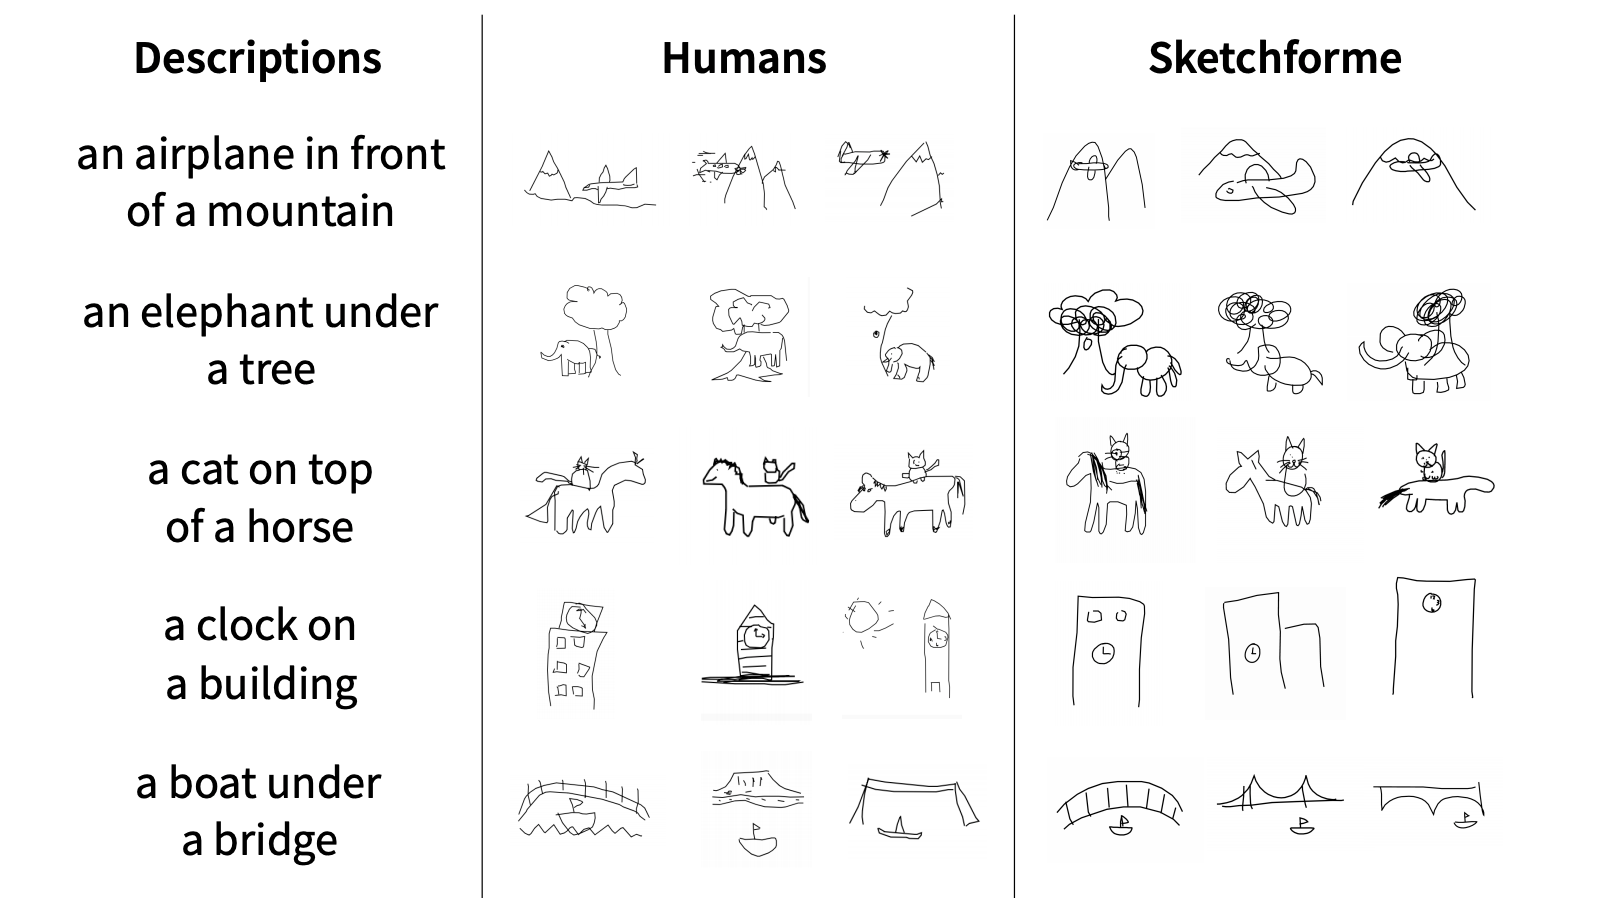 Samples of Sketches produced by humans and Sketchforme used in the AMT user study